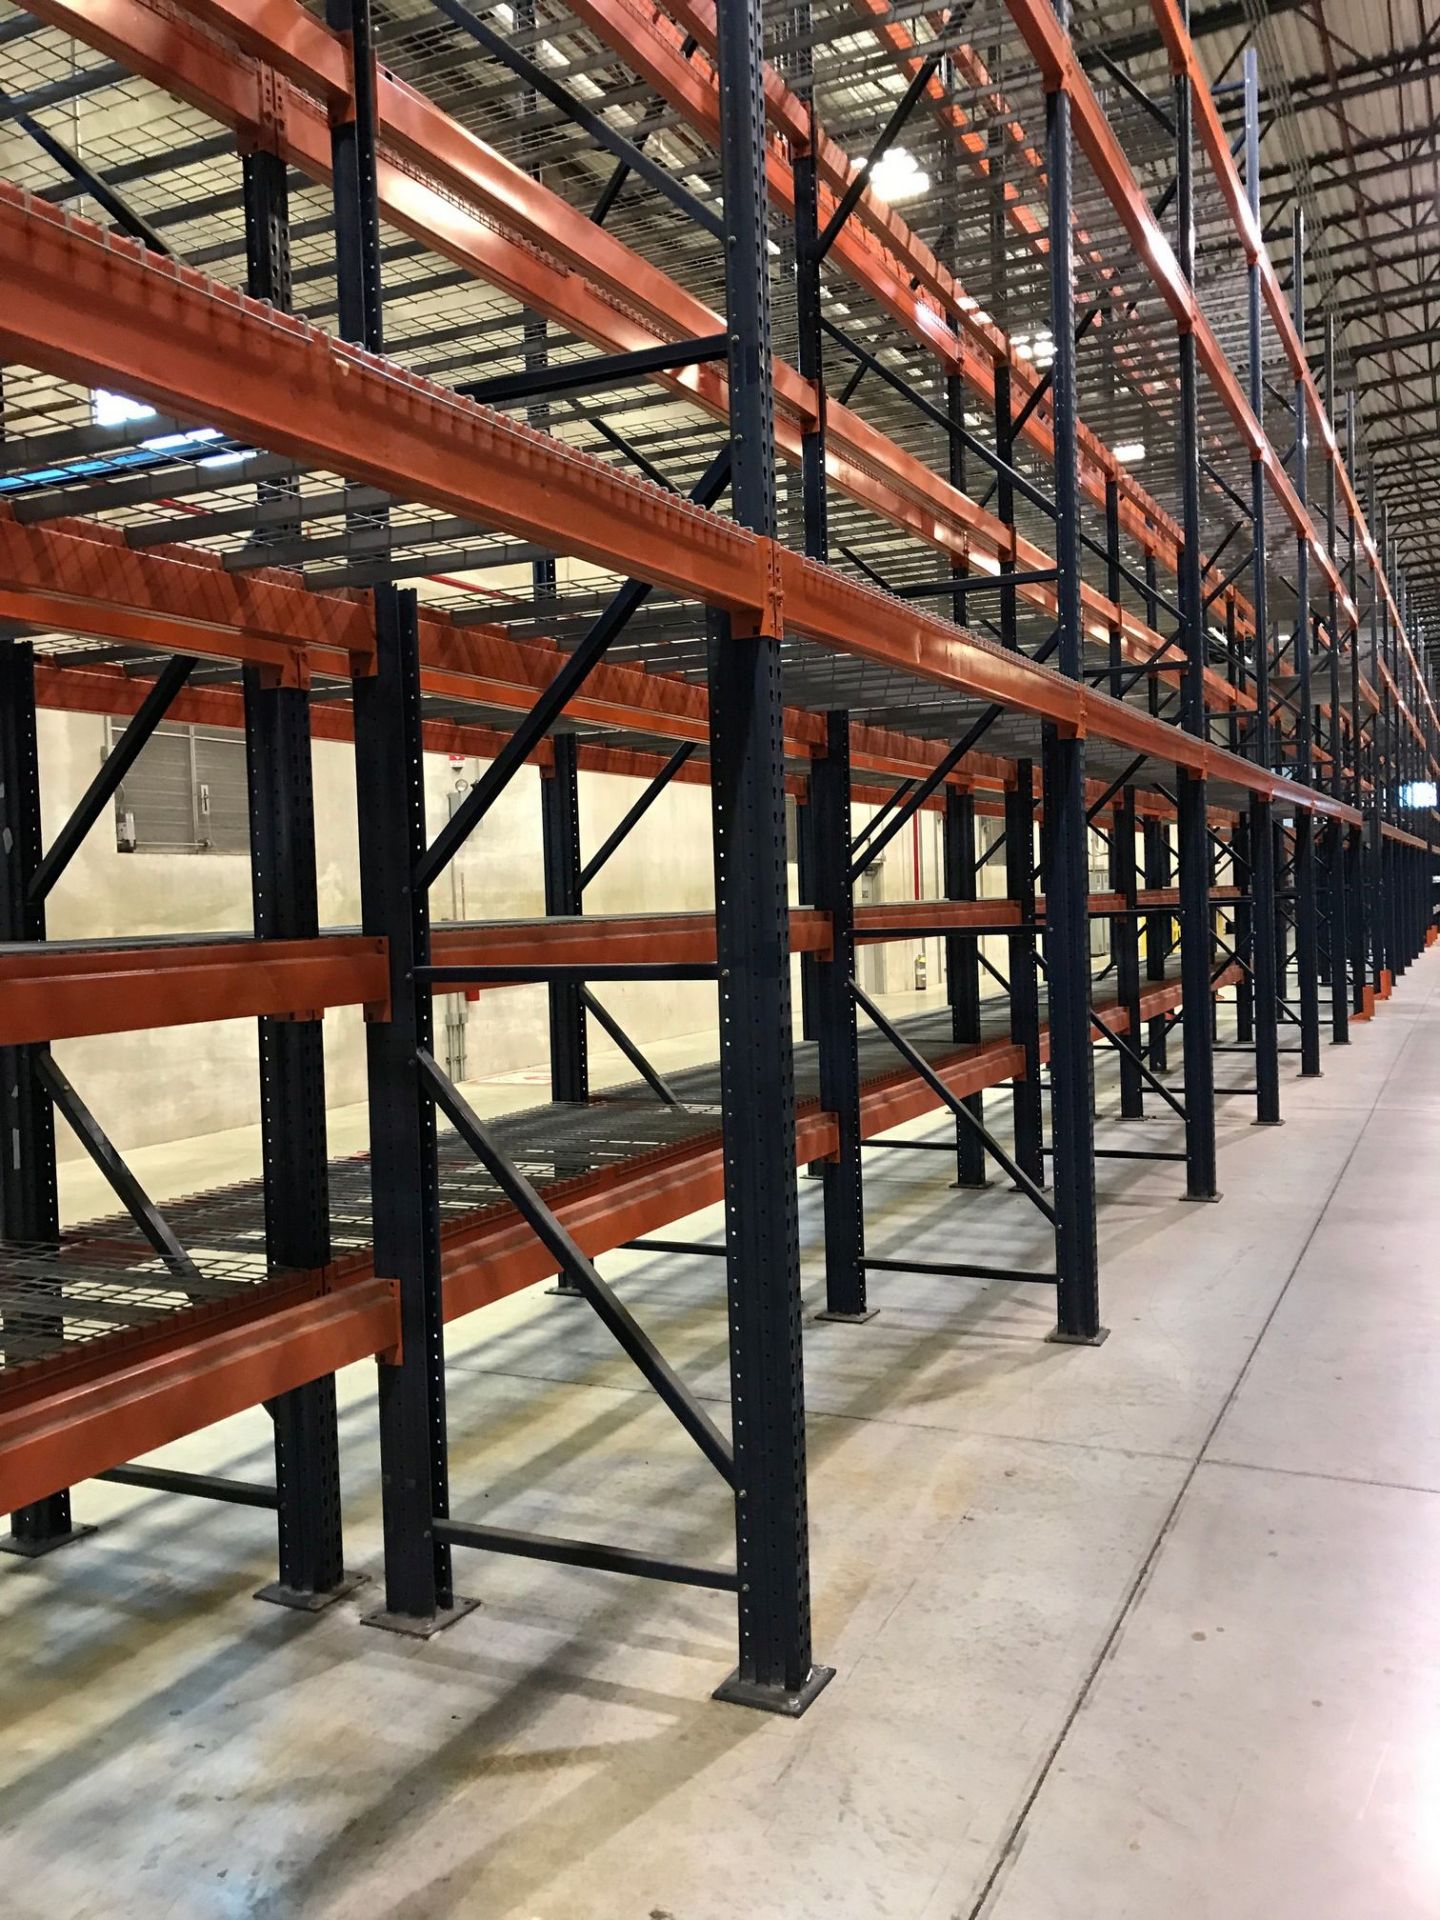 SECTIONS 60" X 108" X 288" TEARDROP TYPE ADJUSTABLE BEAM PALLET RACK WITH WIRE DECKING, 6" HIGH - Image 5 of 16